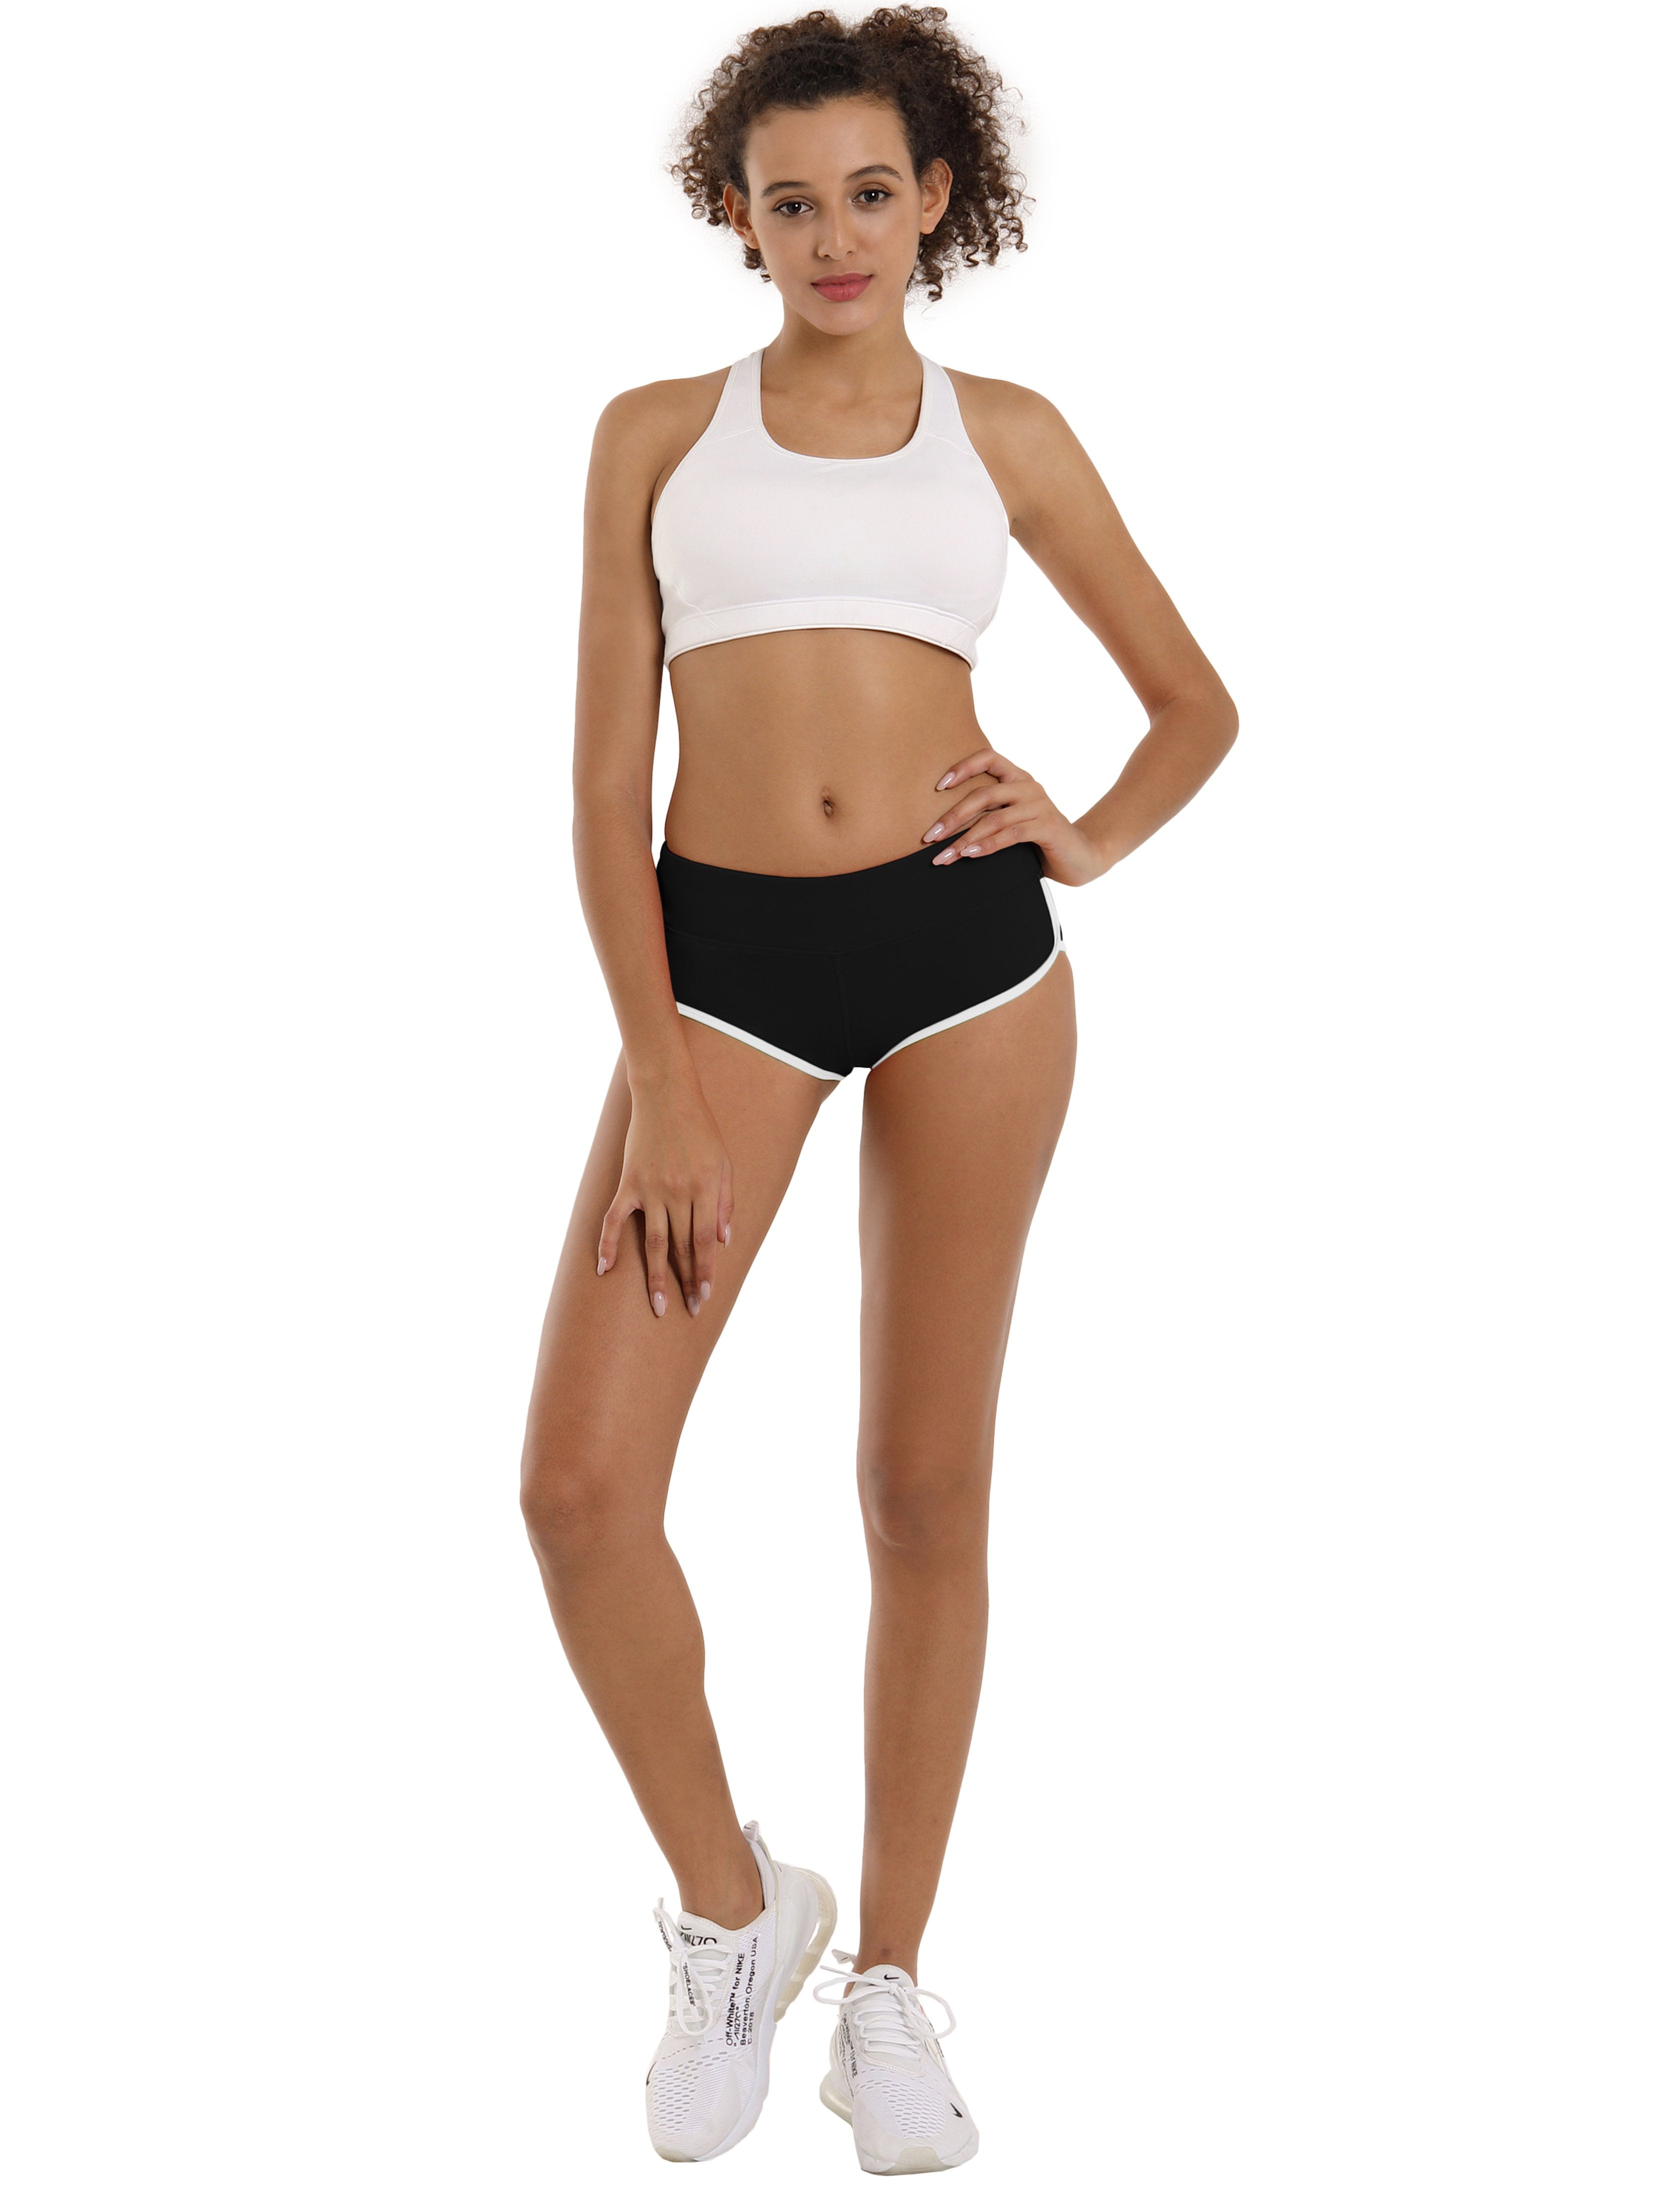 Sexy Booty Yoga Shorts black Sleek, soft, smooth and totally comfortable: our newest sexy style is here. Softest-ever fabric High elasticity High density 4-way stretch Fabric doesn't attract lint easily No see-through Moisture-wicking Machine wash 75%Nylon/25%Spandex